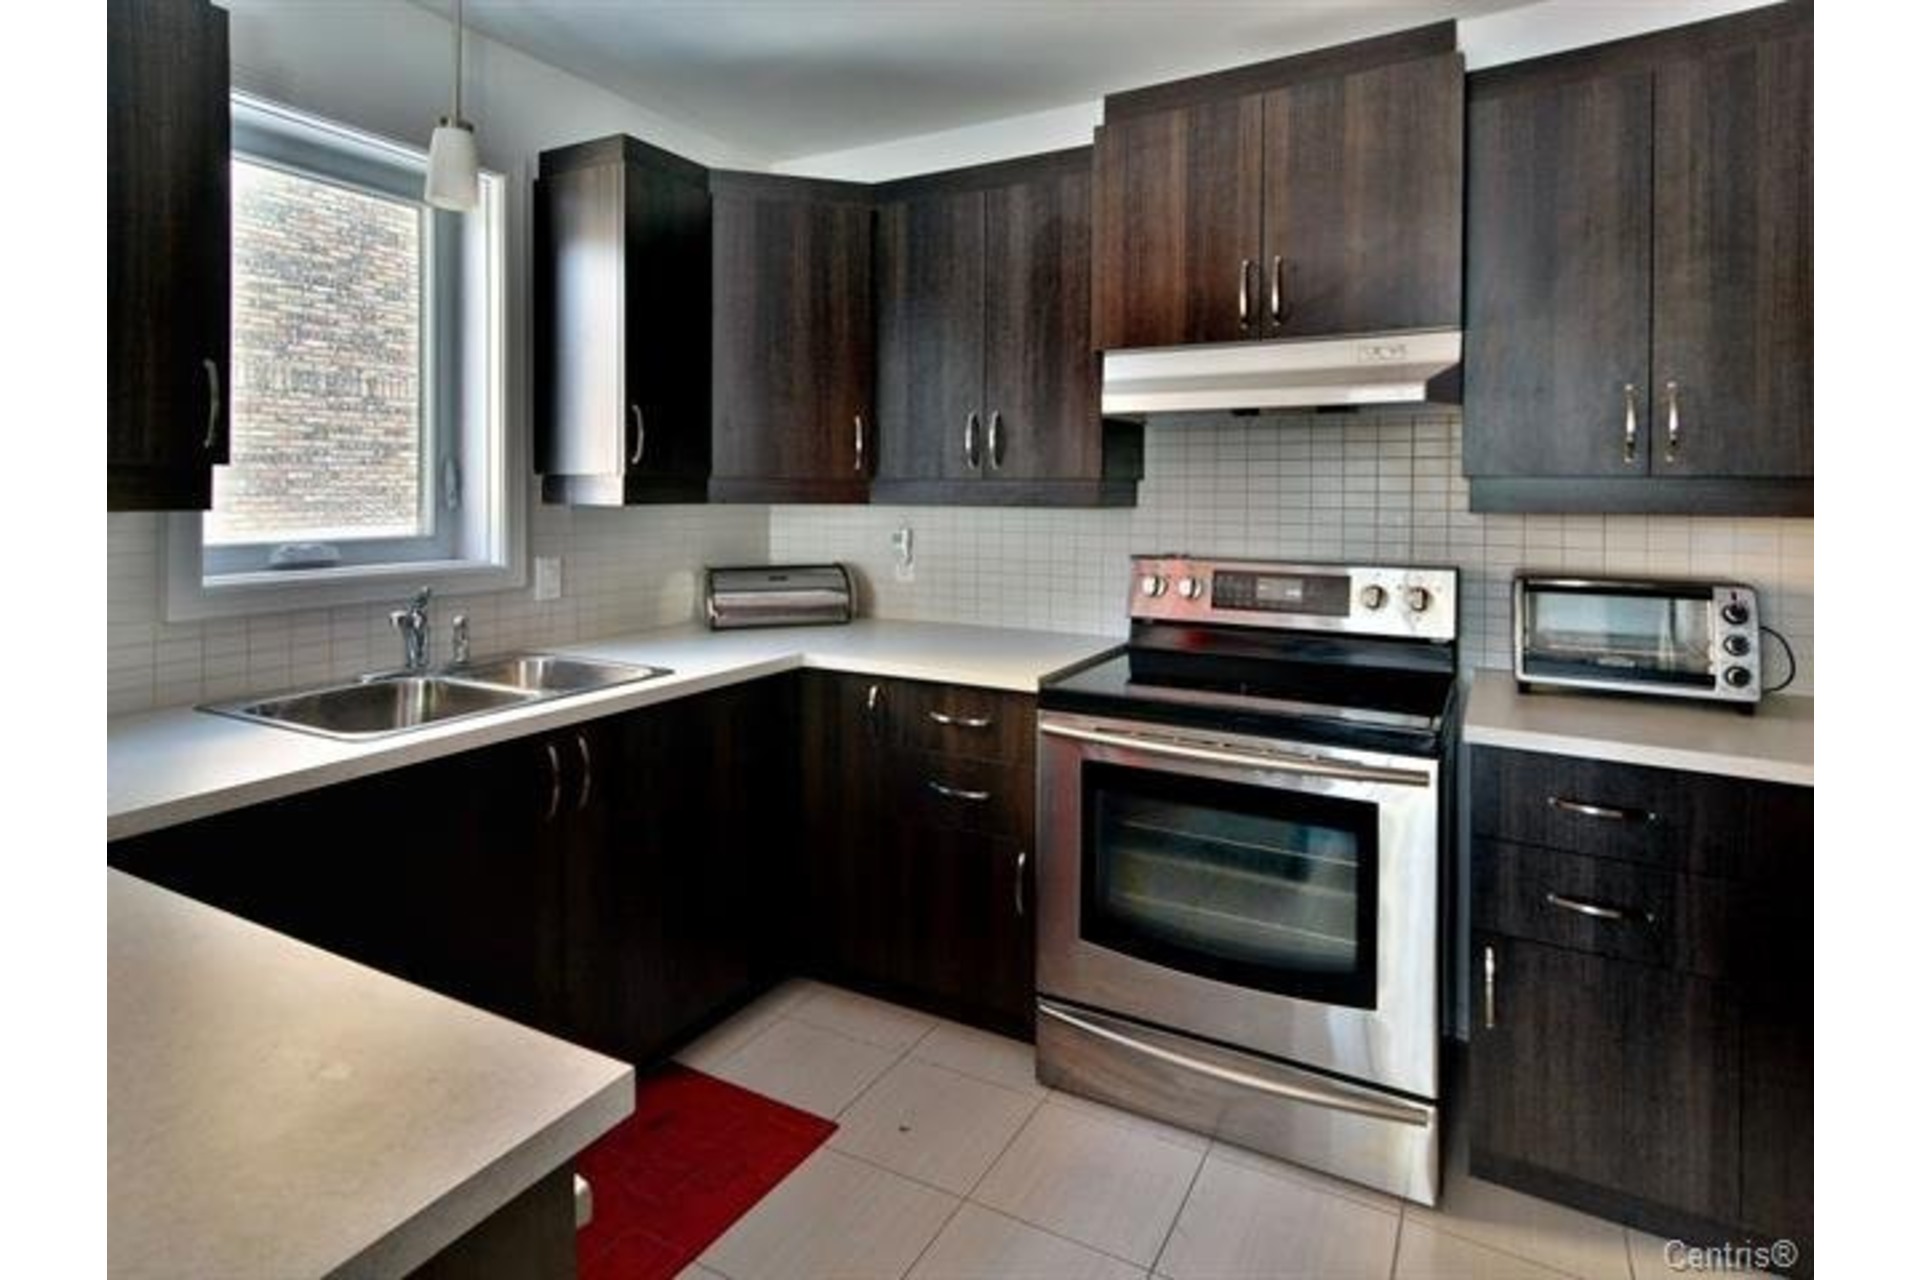 image 4 - Apartment For rent Vaudreuil-Dorion - 7 rooms